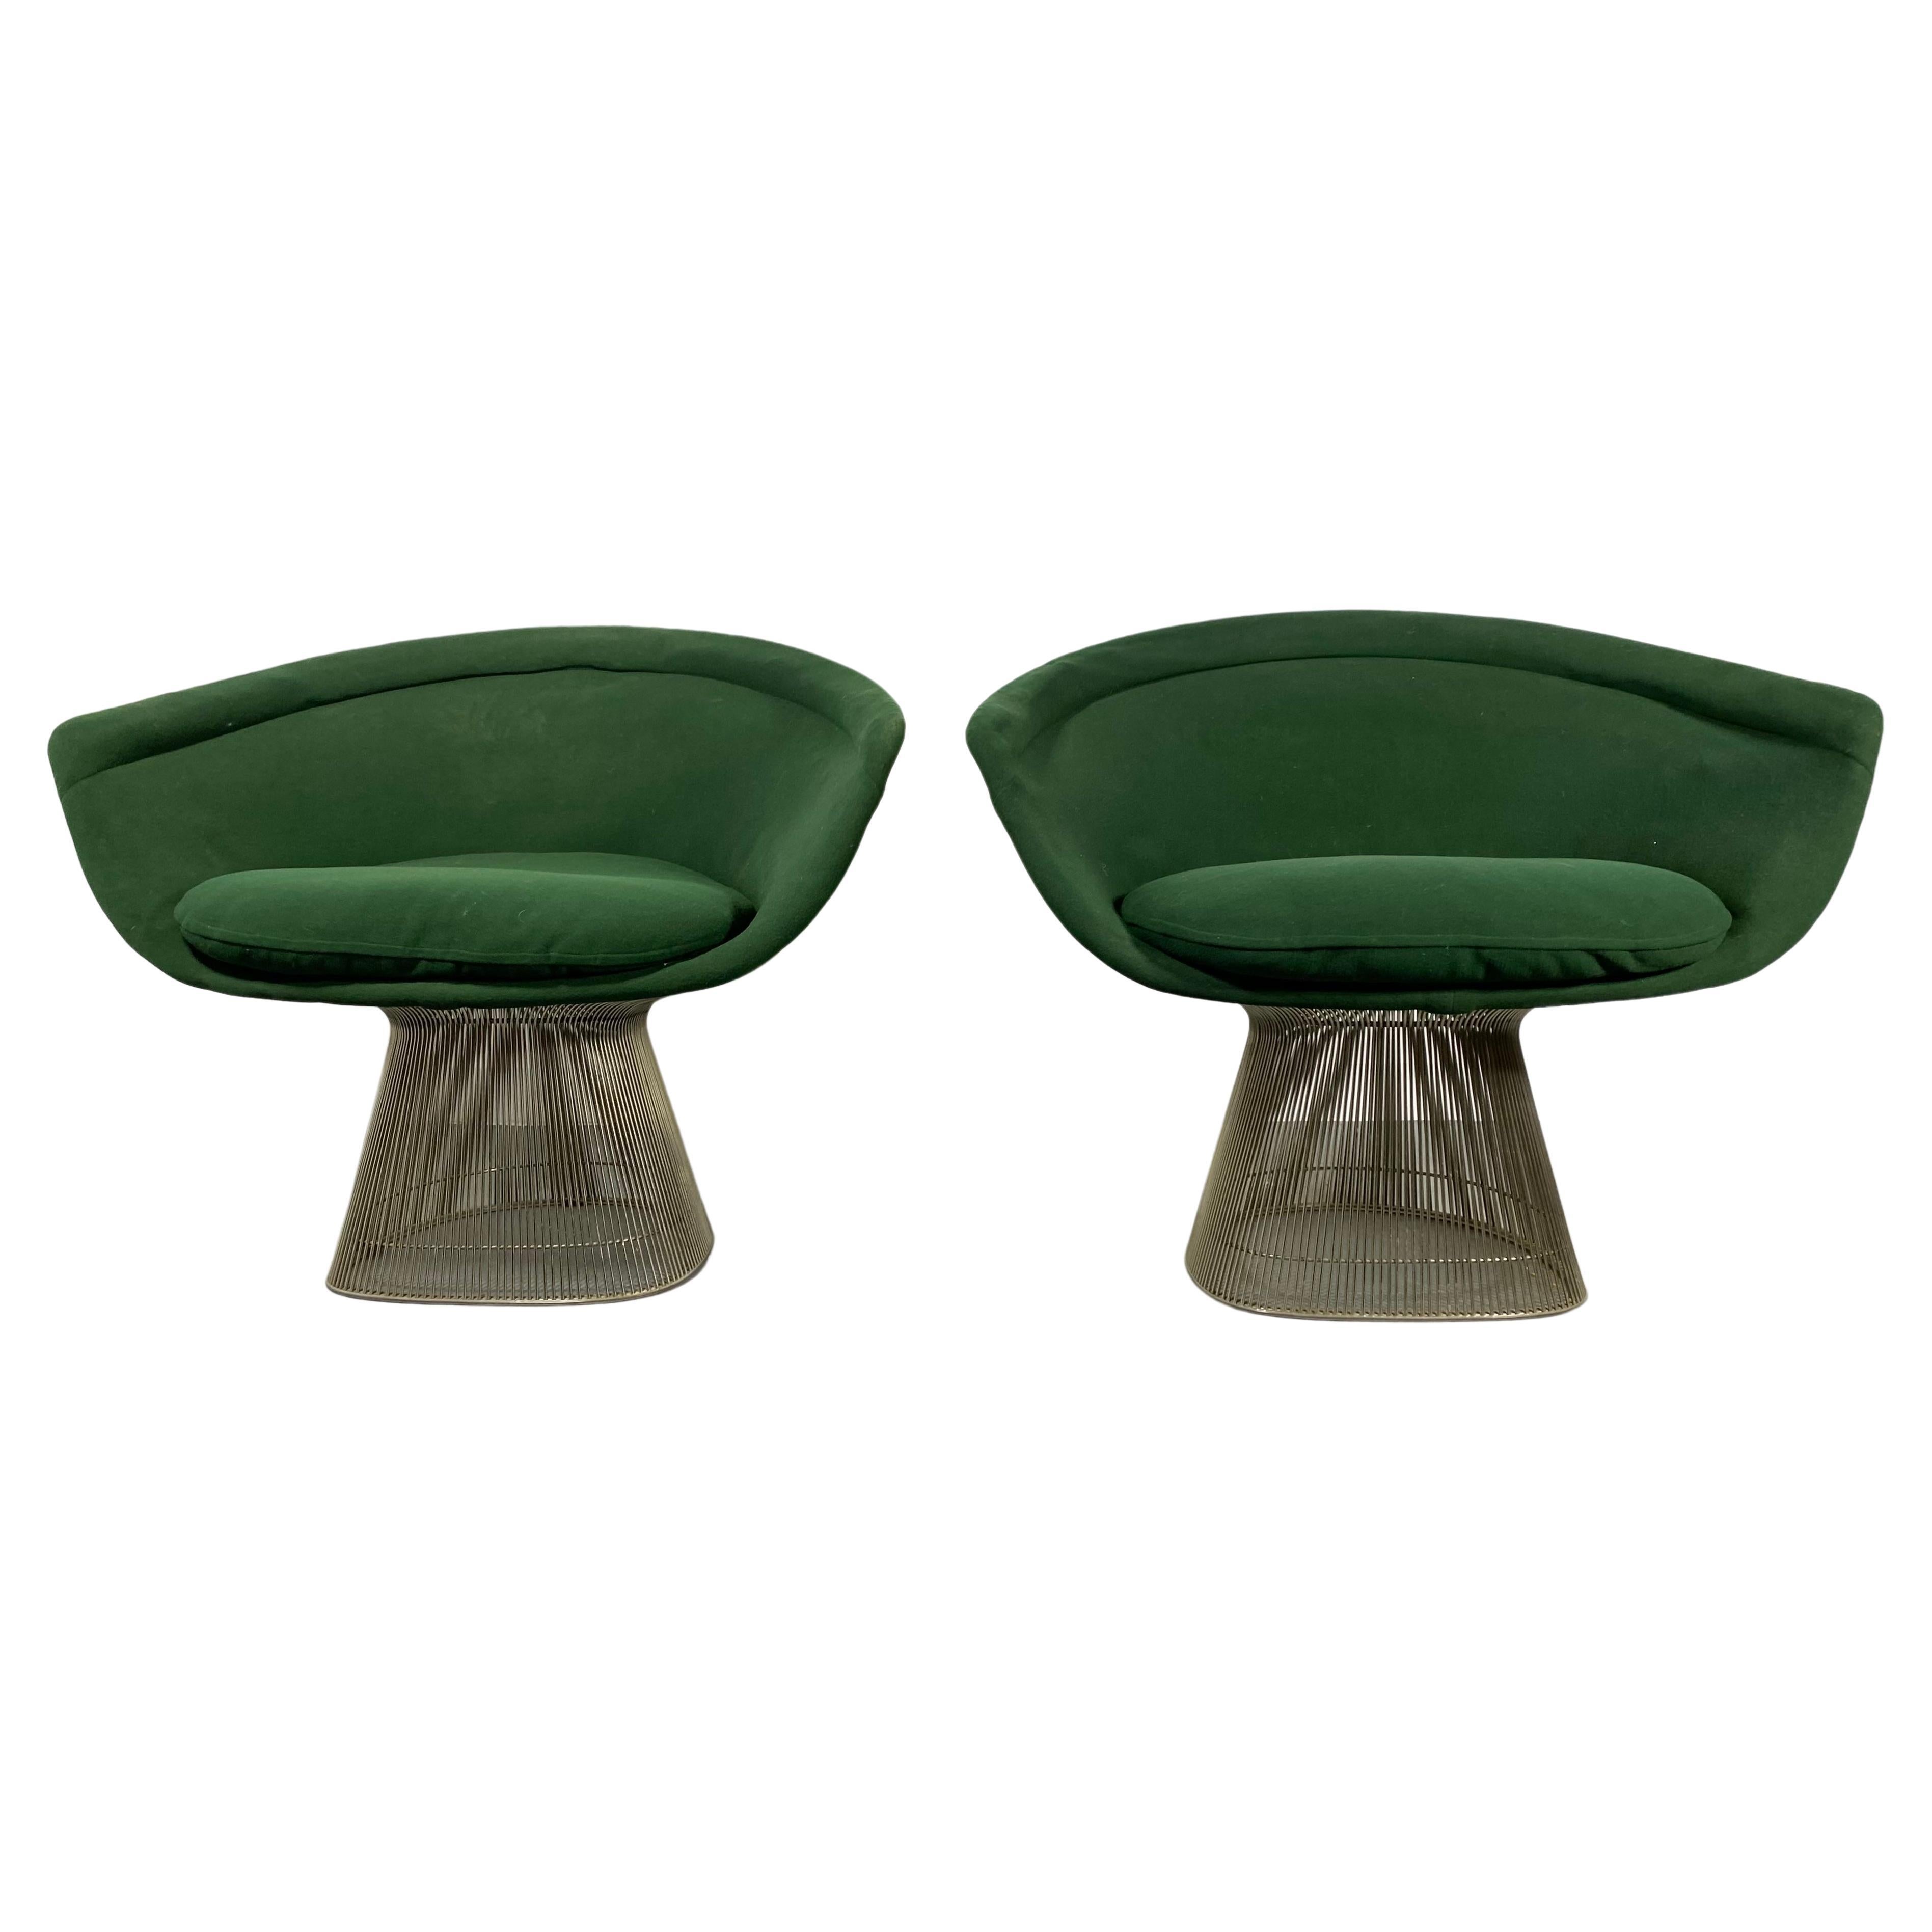 Pair Warren Platner Lounge Chairs, Classic Modernist, Manufactured by Knoll For Sale